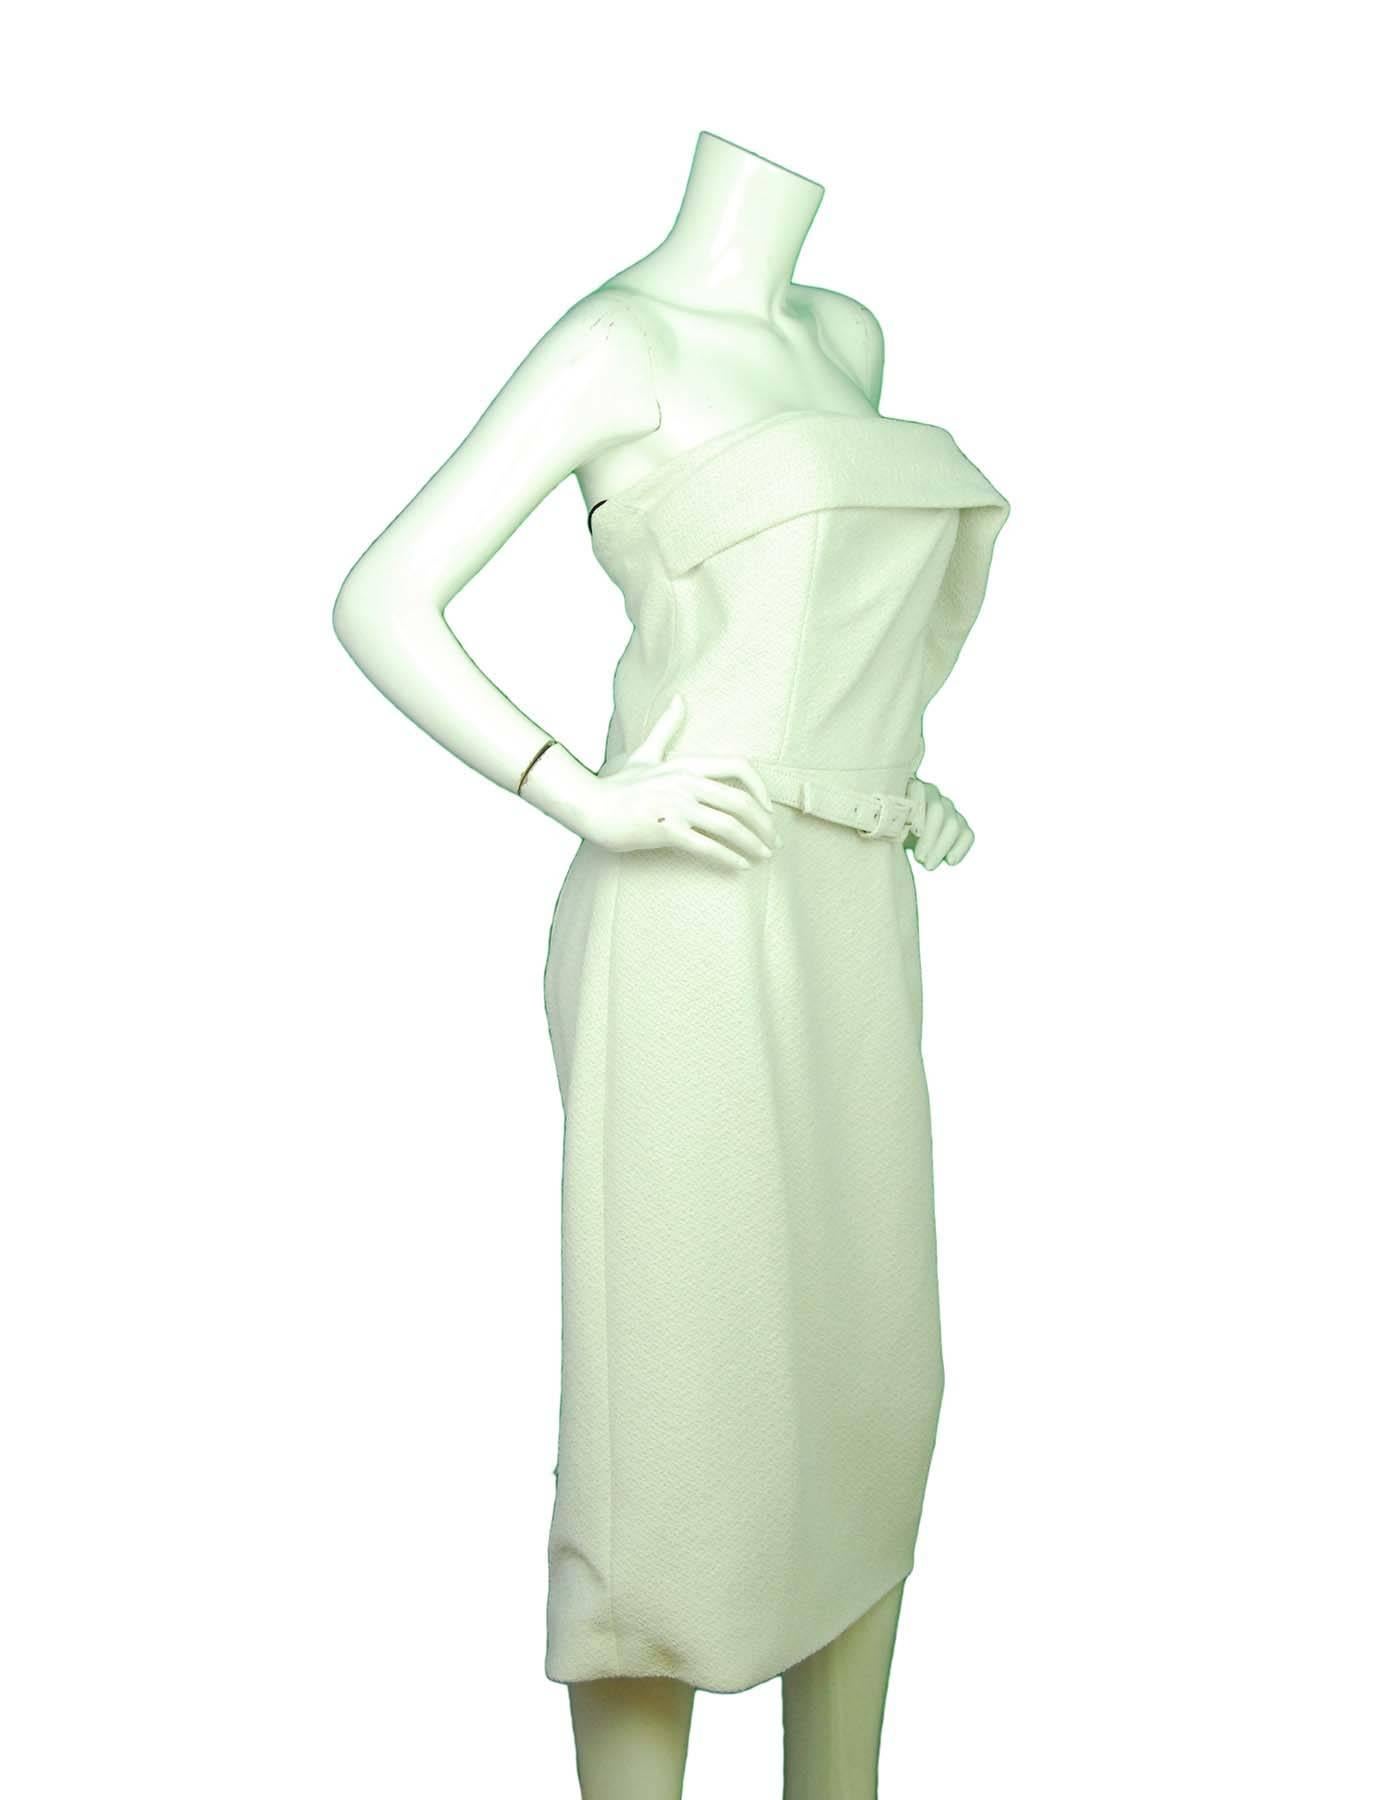 Christian Siriano White Strapless Dress Sz 12
Features asymmetrical neckline ruffle and belt at waist

Made In: USA
Color: White
Composition: 56% viscose, 21% polyester, 17% virgin wool, 6% polyamid
Lining: Black 100%